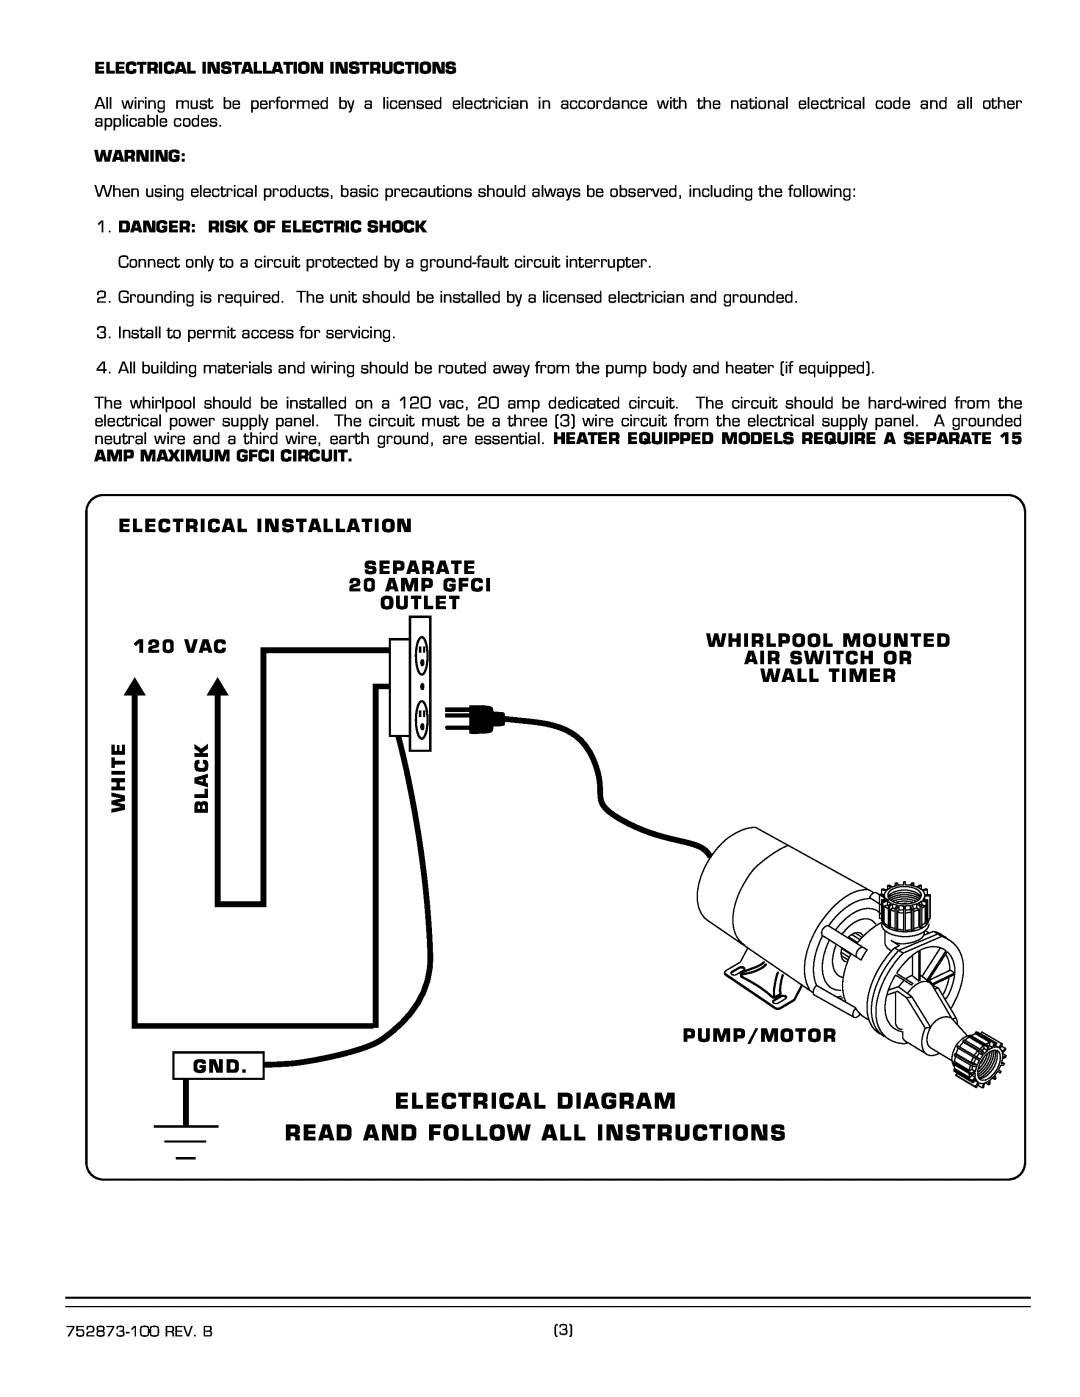 American Standard 2711E installation instructions Electrical Diagram Read And Follow All Instructions 